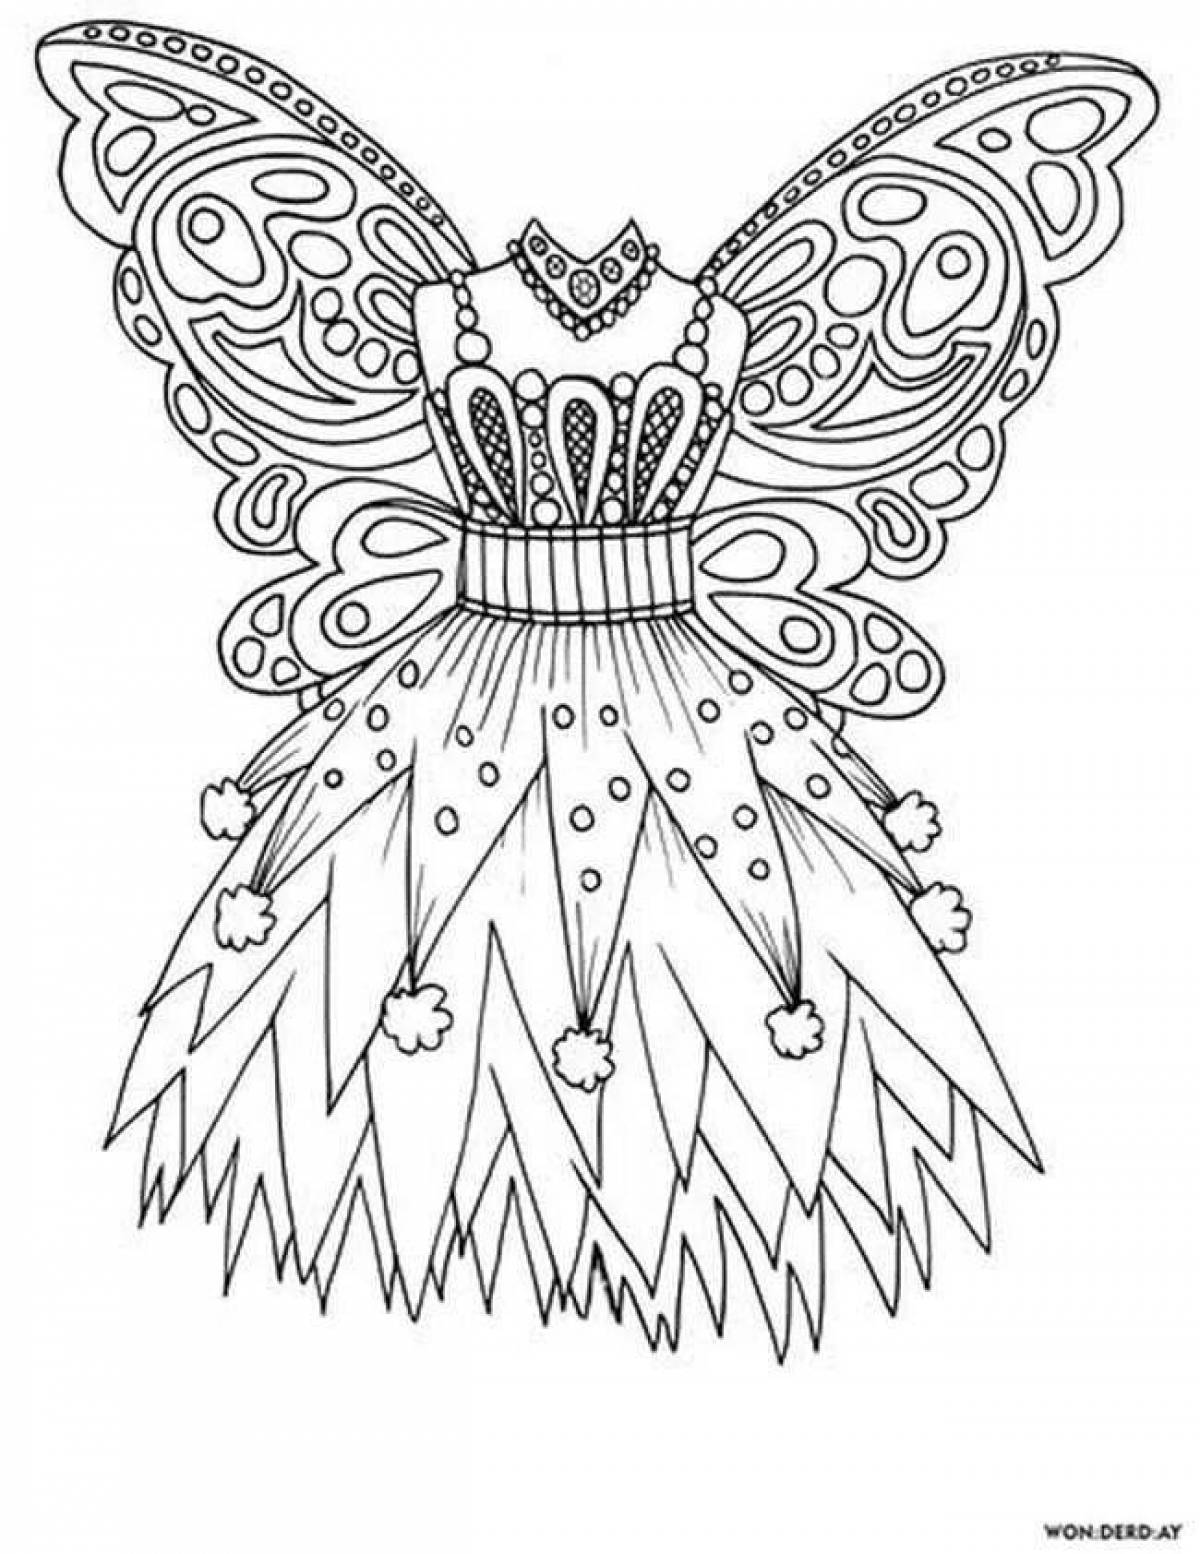 Coloring book exquisite outfit